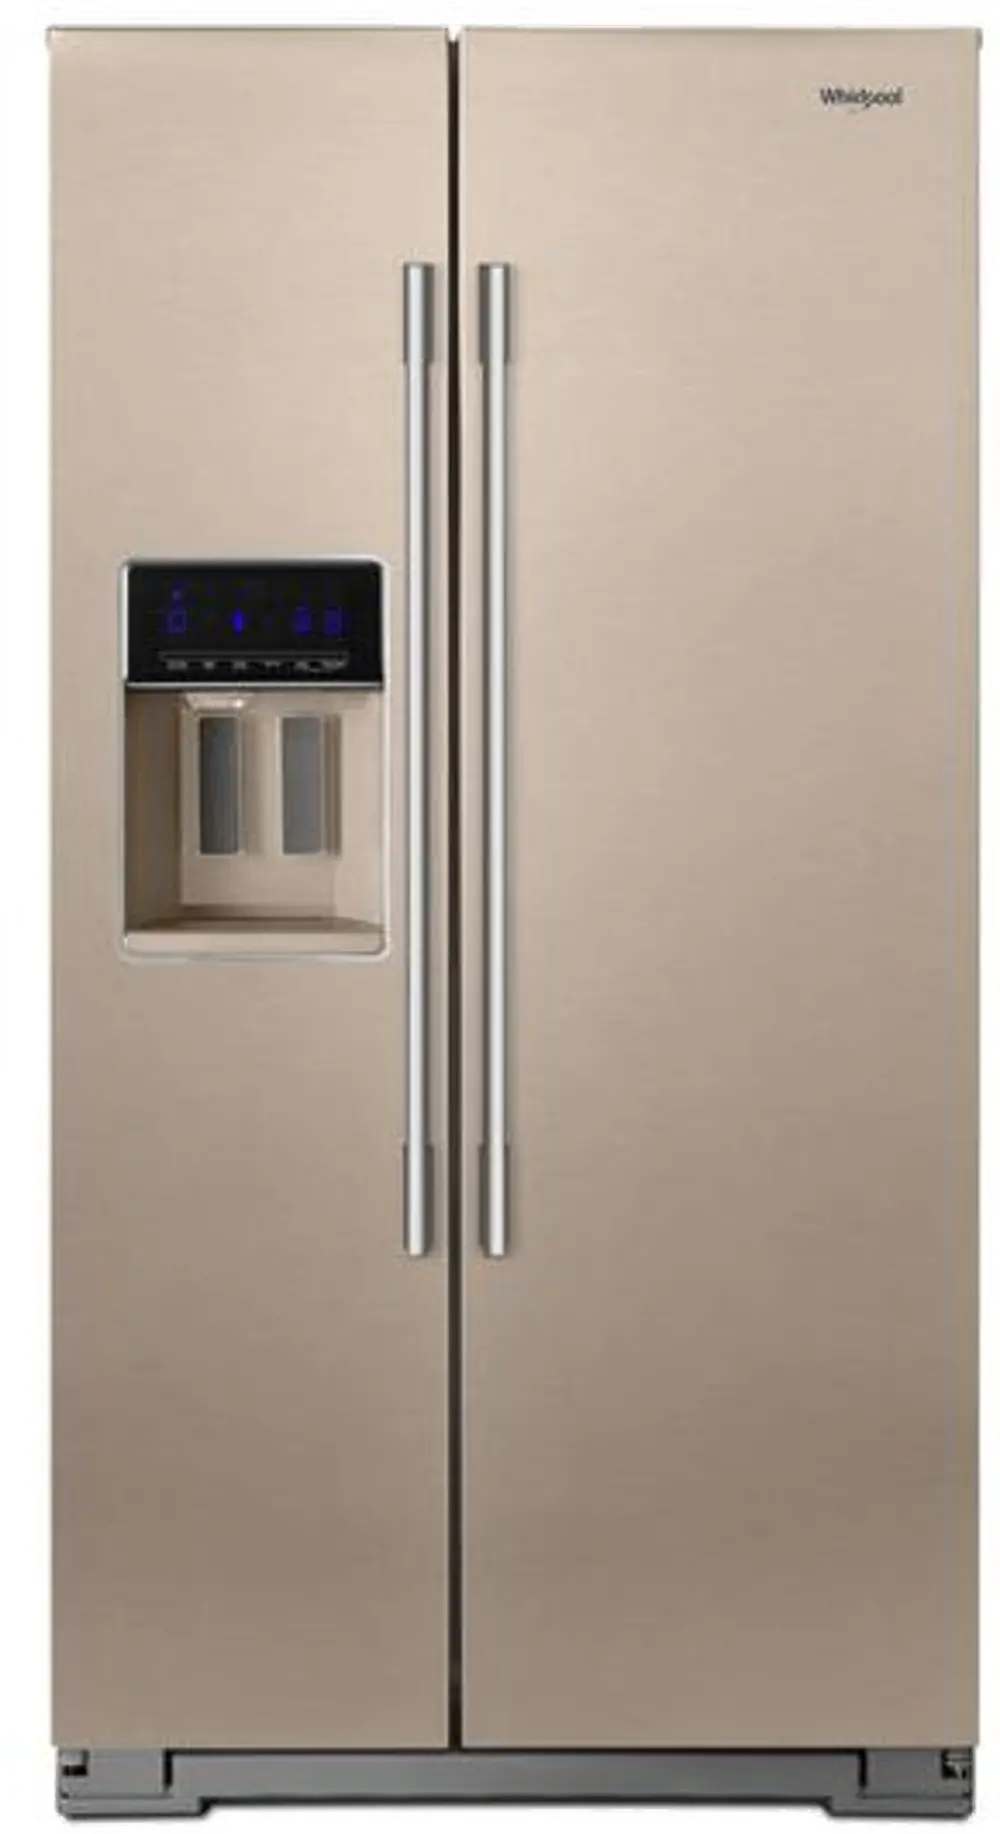 WRSA71CIHN Whirlpool Side-by-Side Refrigerator with FreshFlow Air Filter - 36 Inch Sunset Bronze-1